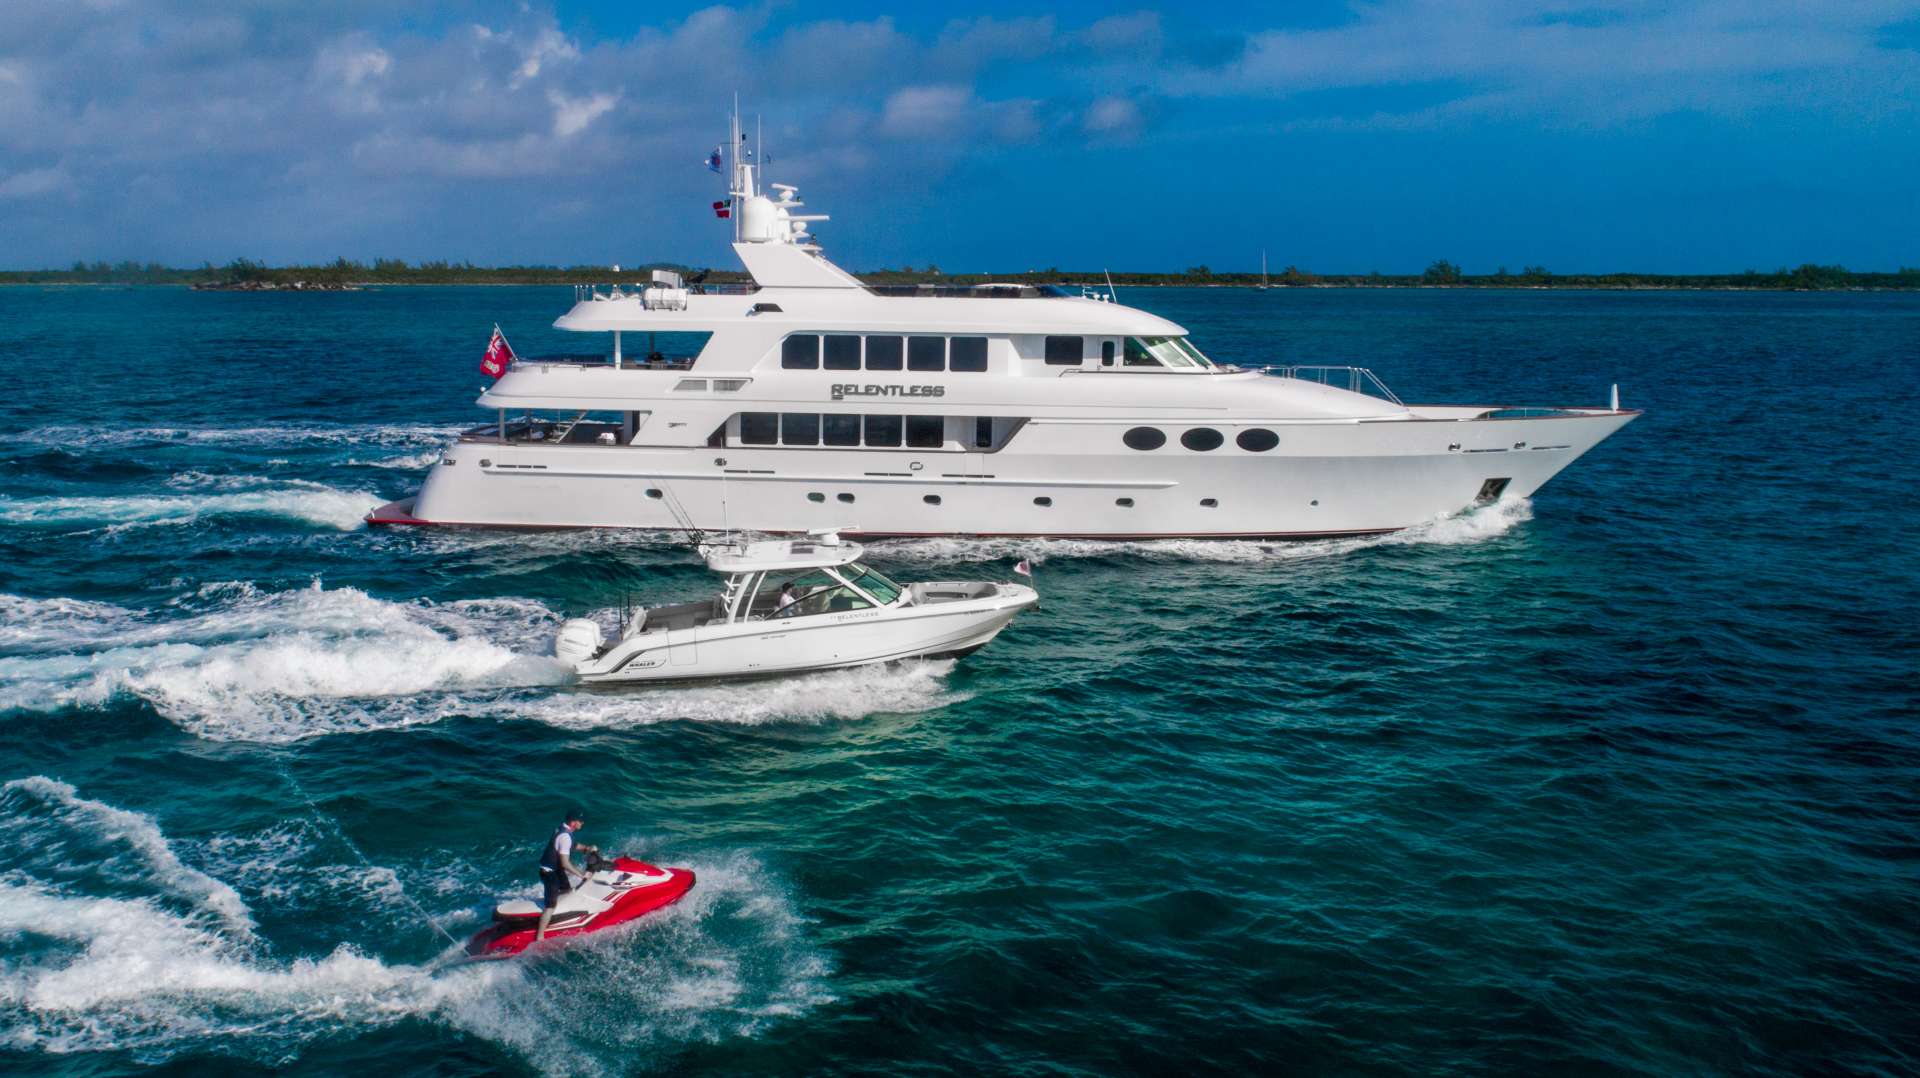 RELENTLESS Yacht Charter - Tender and toys